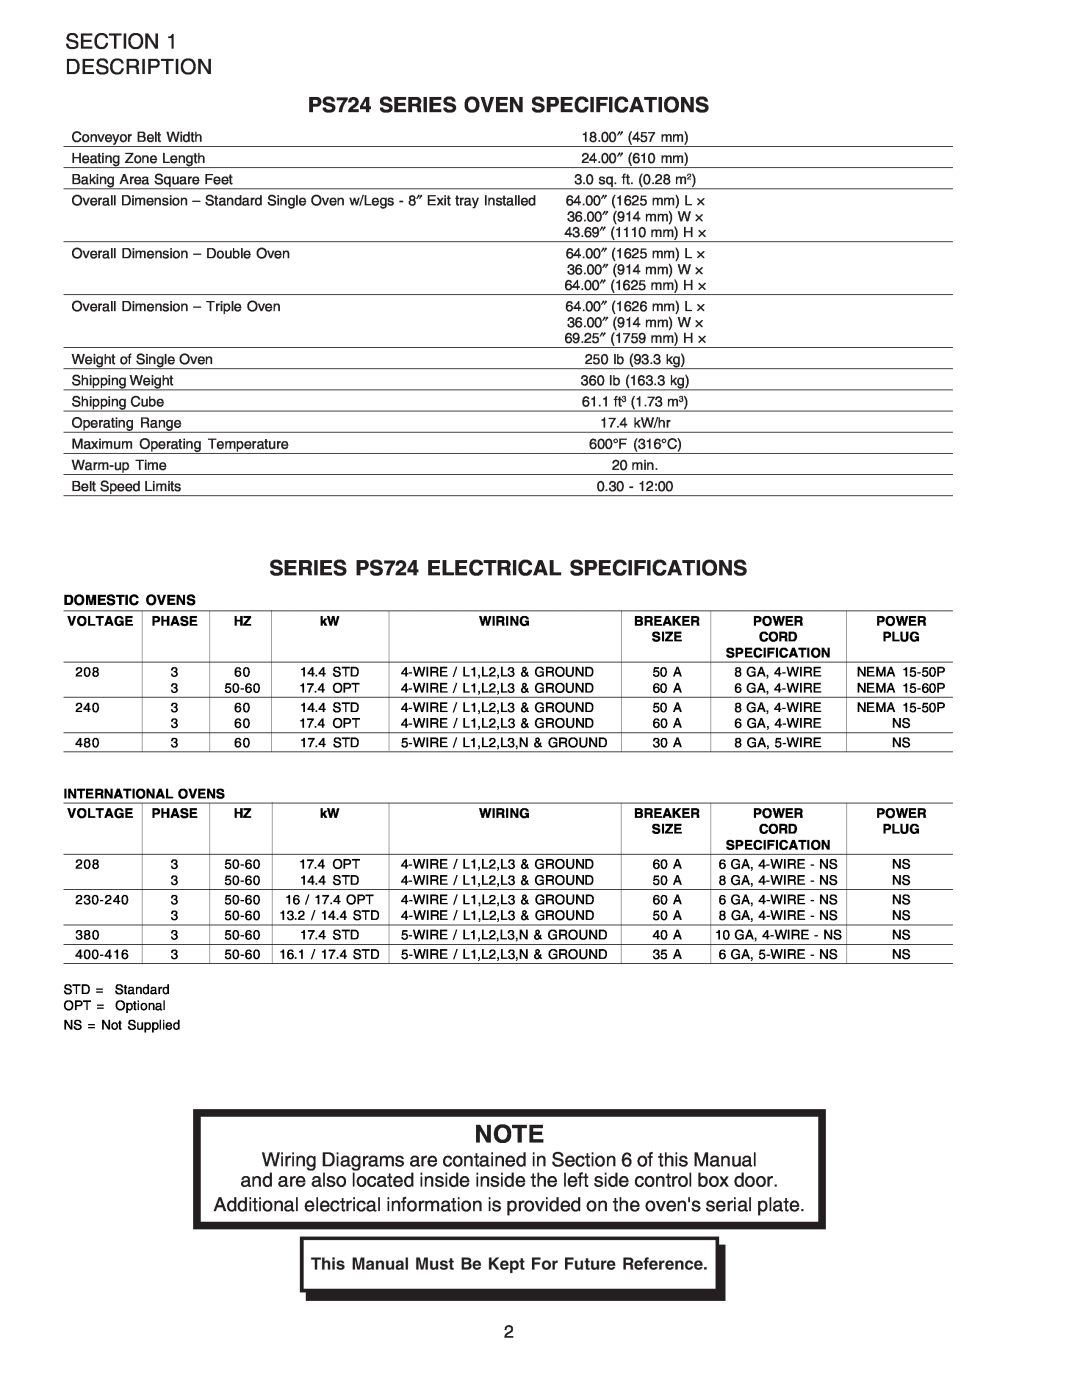 Middleby Marshall PS724E PS724 SERIES OVEN SPECIFICATIONS, SERIES PS724 ELECTRICAL SPECIFICATIONS, Section Description 